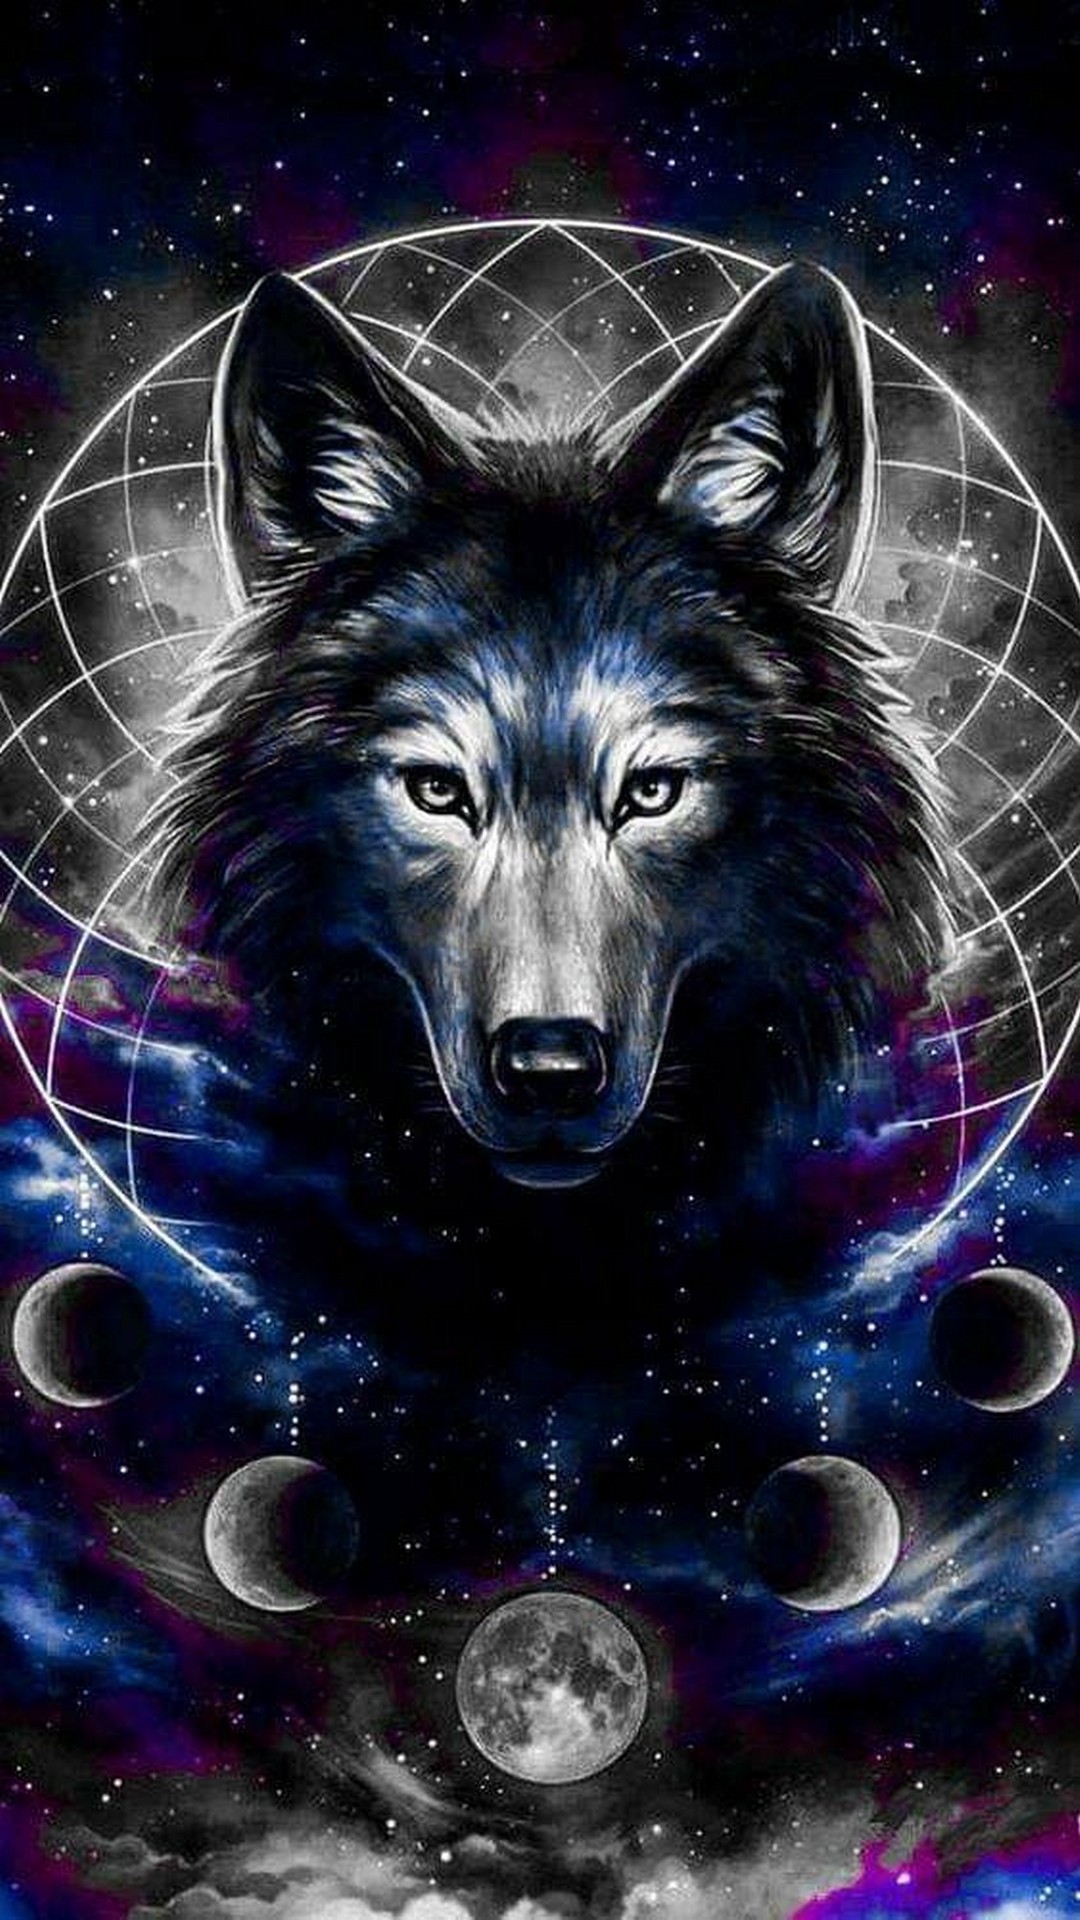 Cool Wolf Wallpaper for iPhone with high-resolution 1080x1920 pixel. You can use this wallpaper for your iPhone 5, 6, 7, 8, X, XS, XR backgrounds, Mobile Screensaver, or iPad Lock Screen